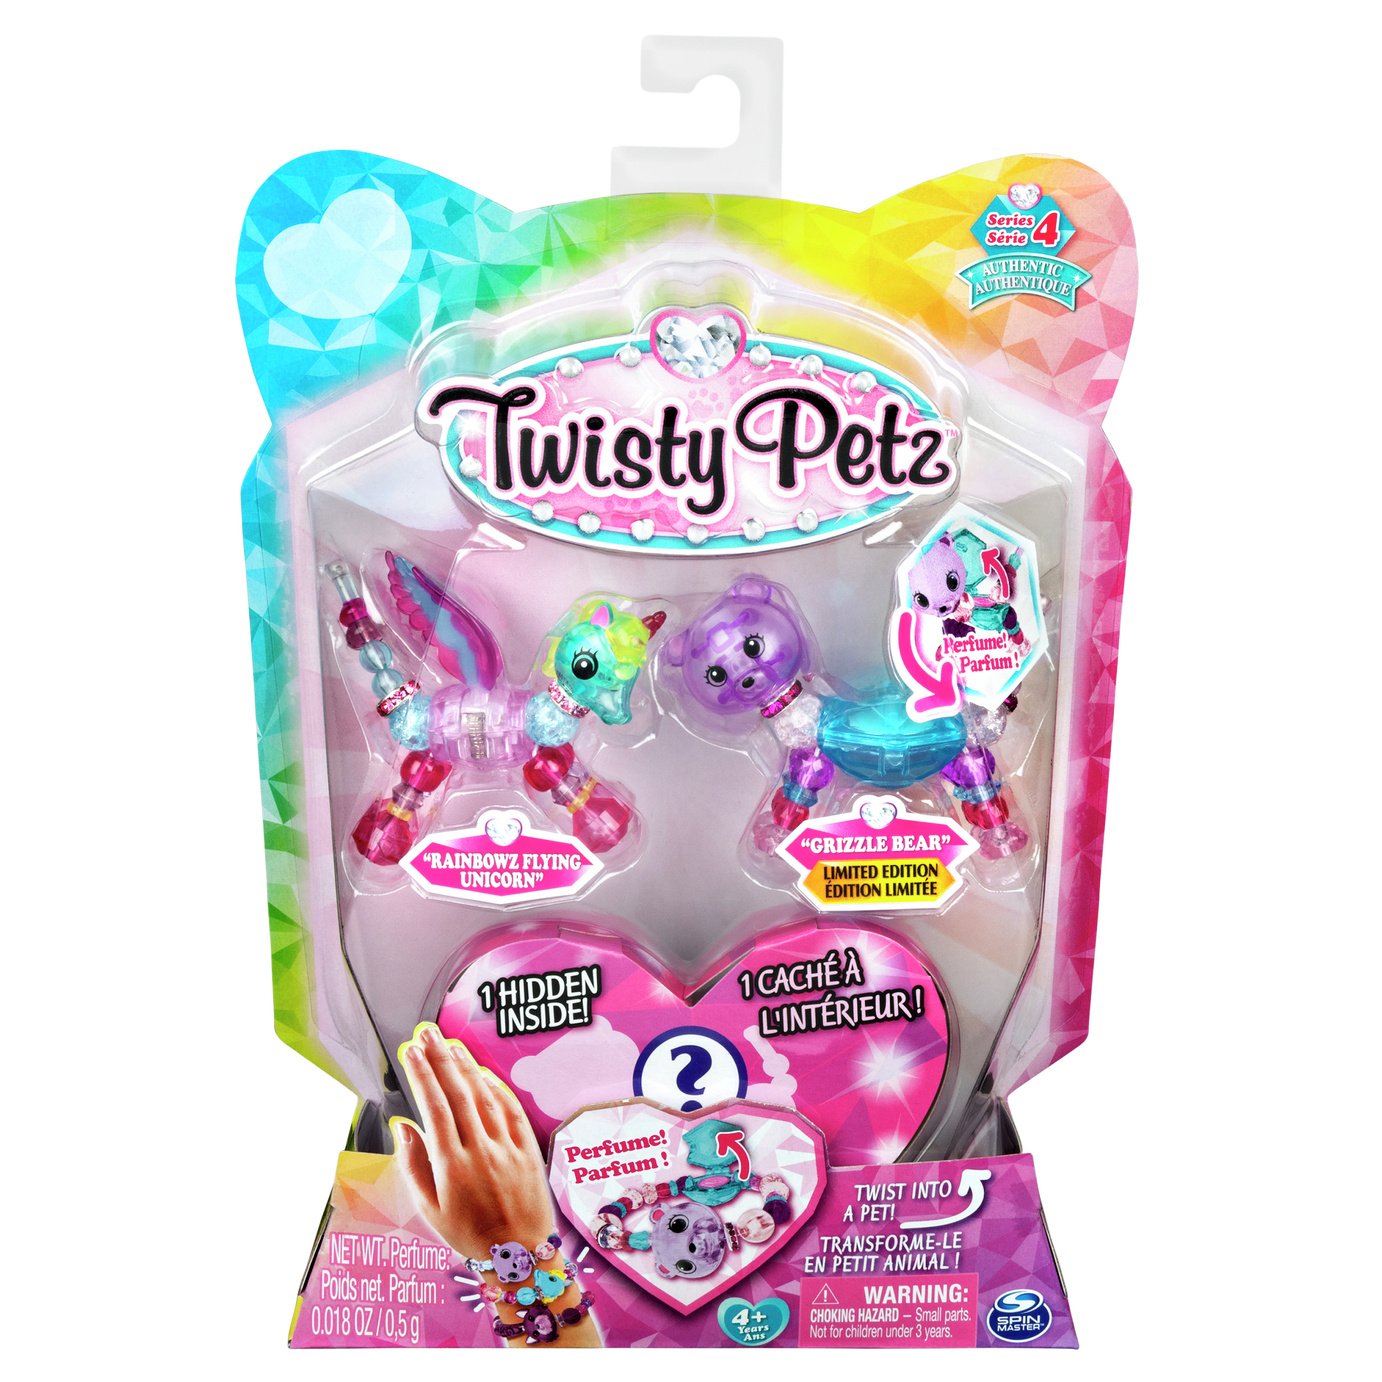 Twisty Pets Review